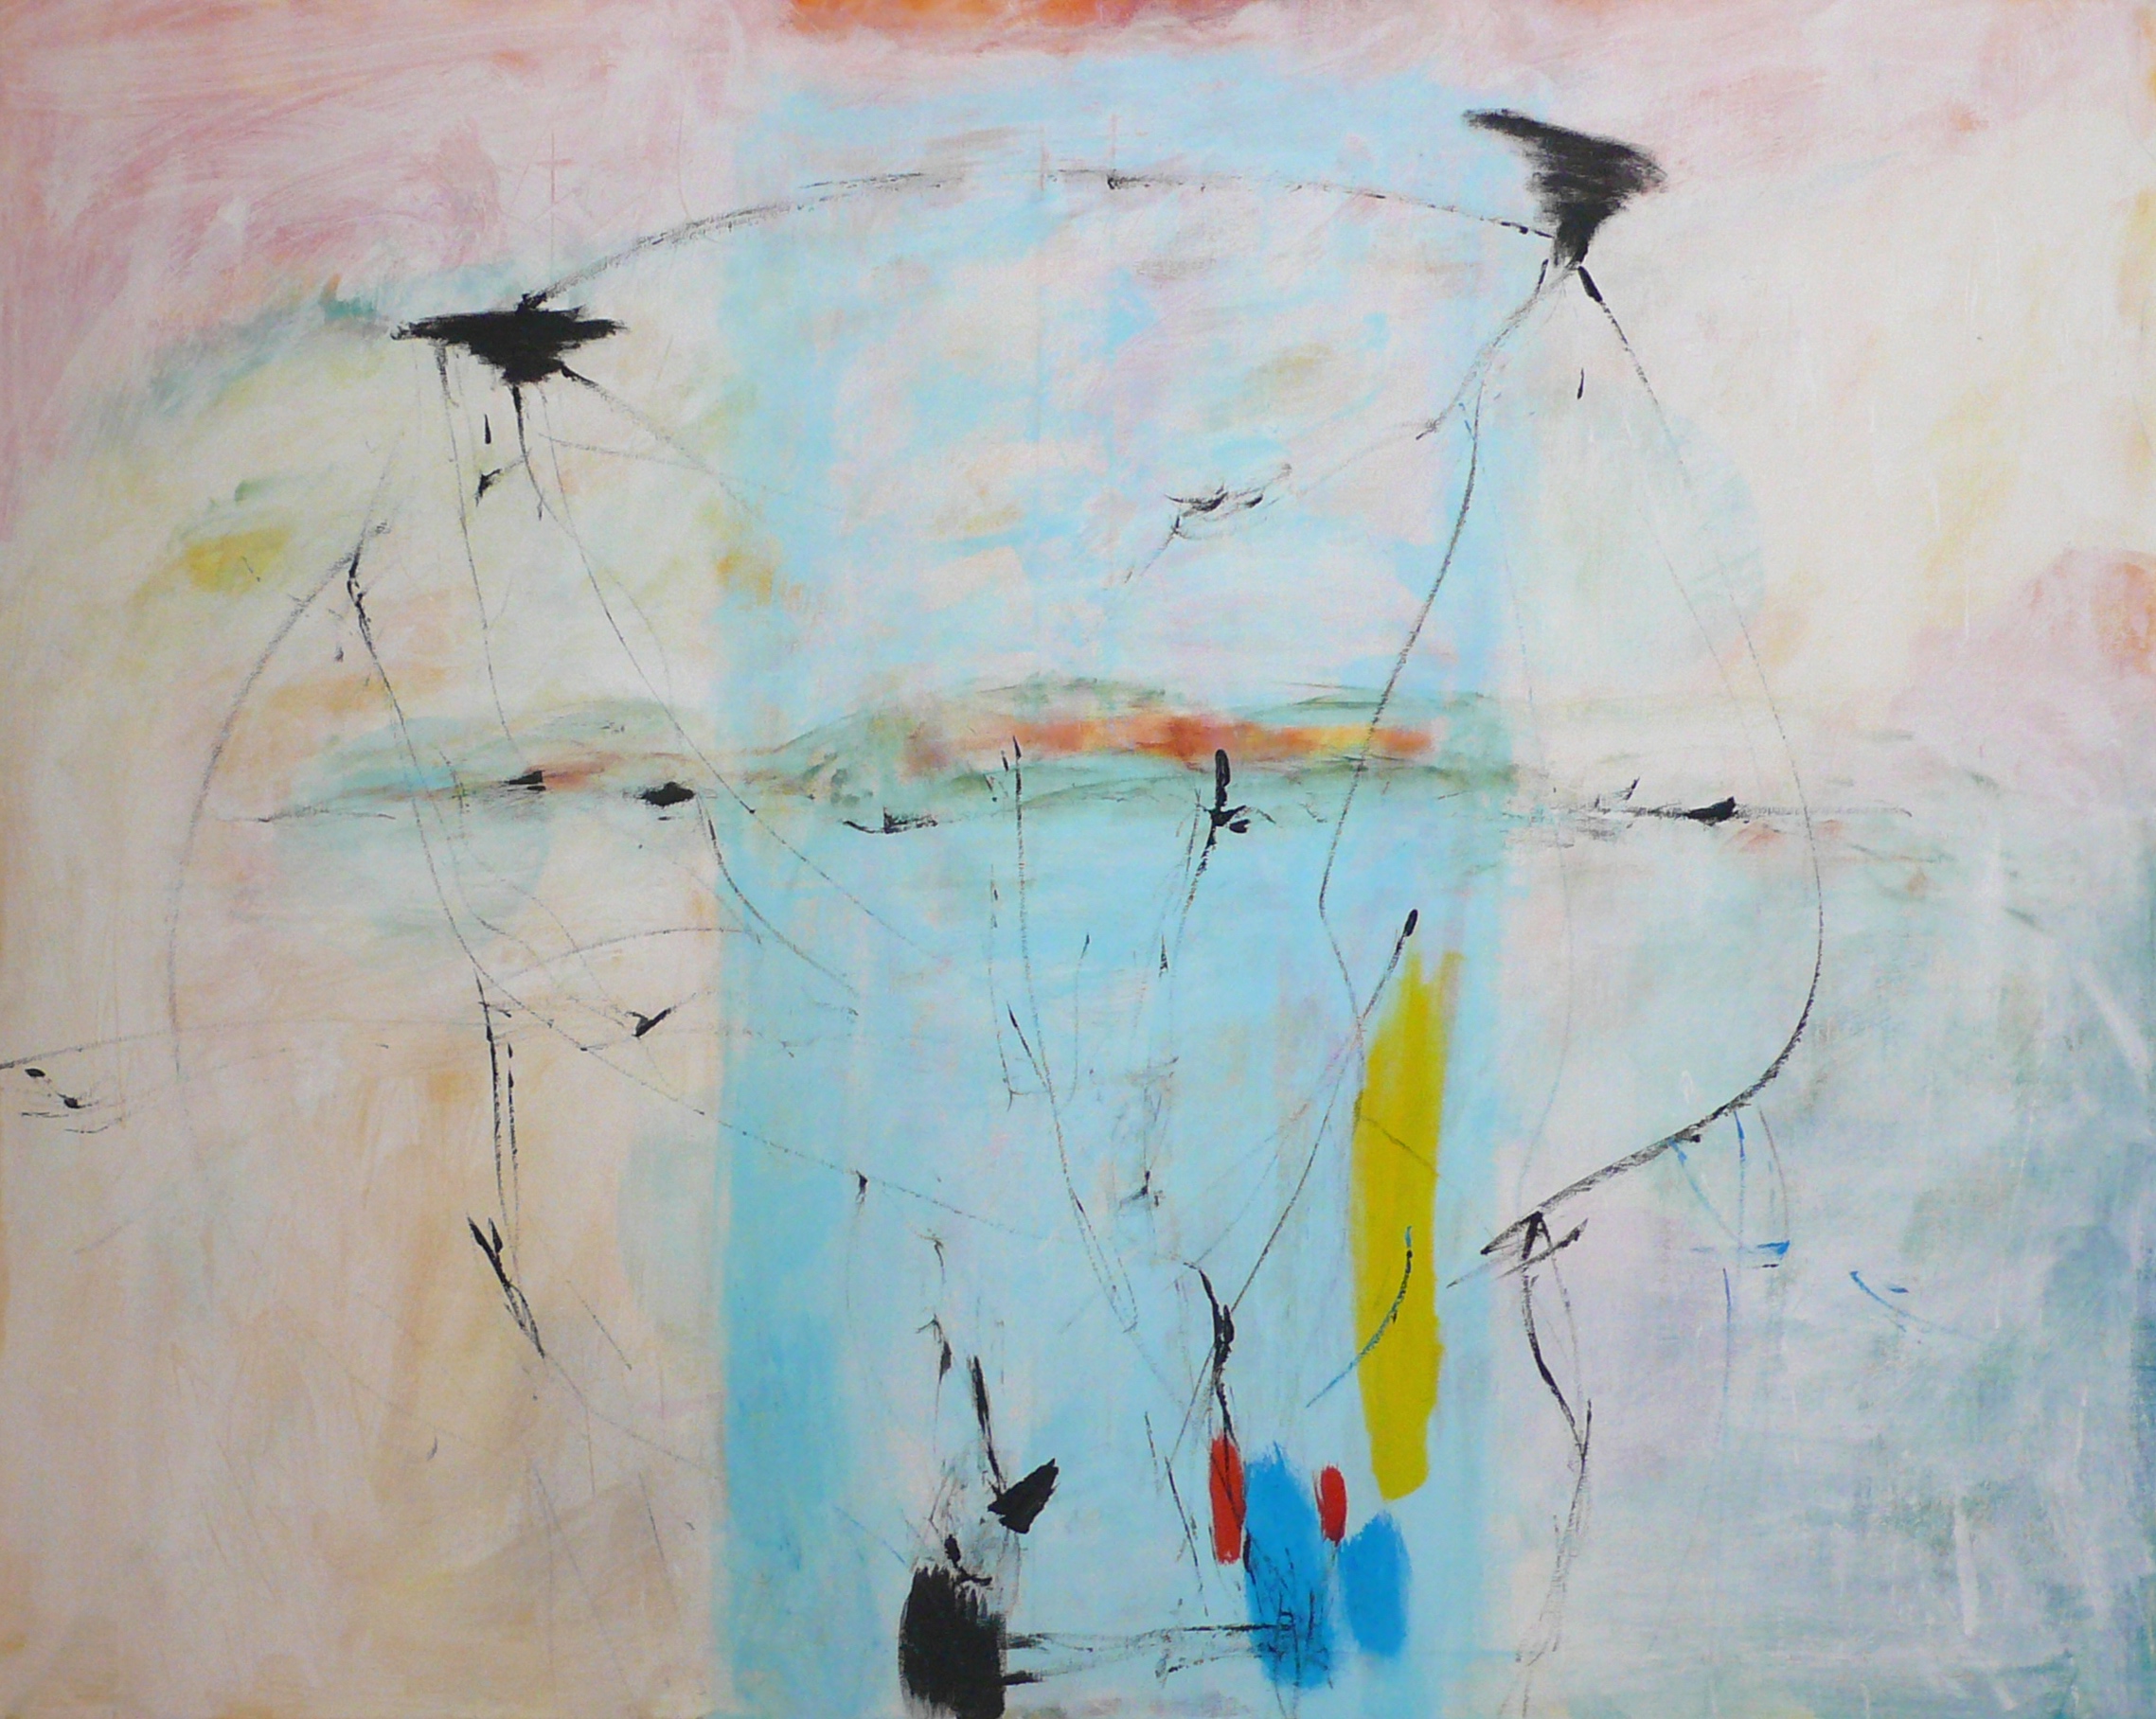 Out of the Blue, 2014 80 x 100 cm